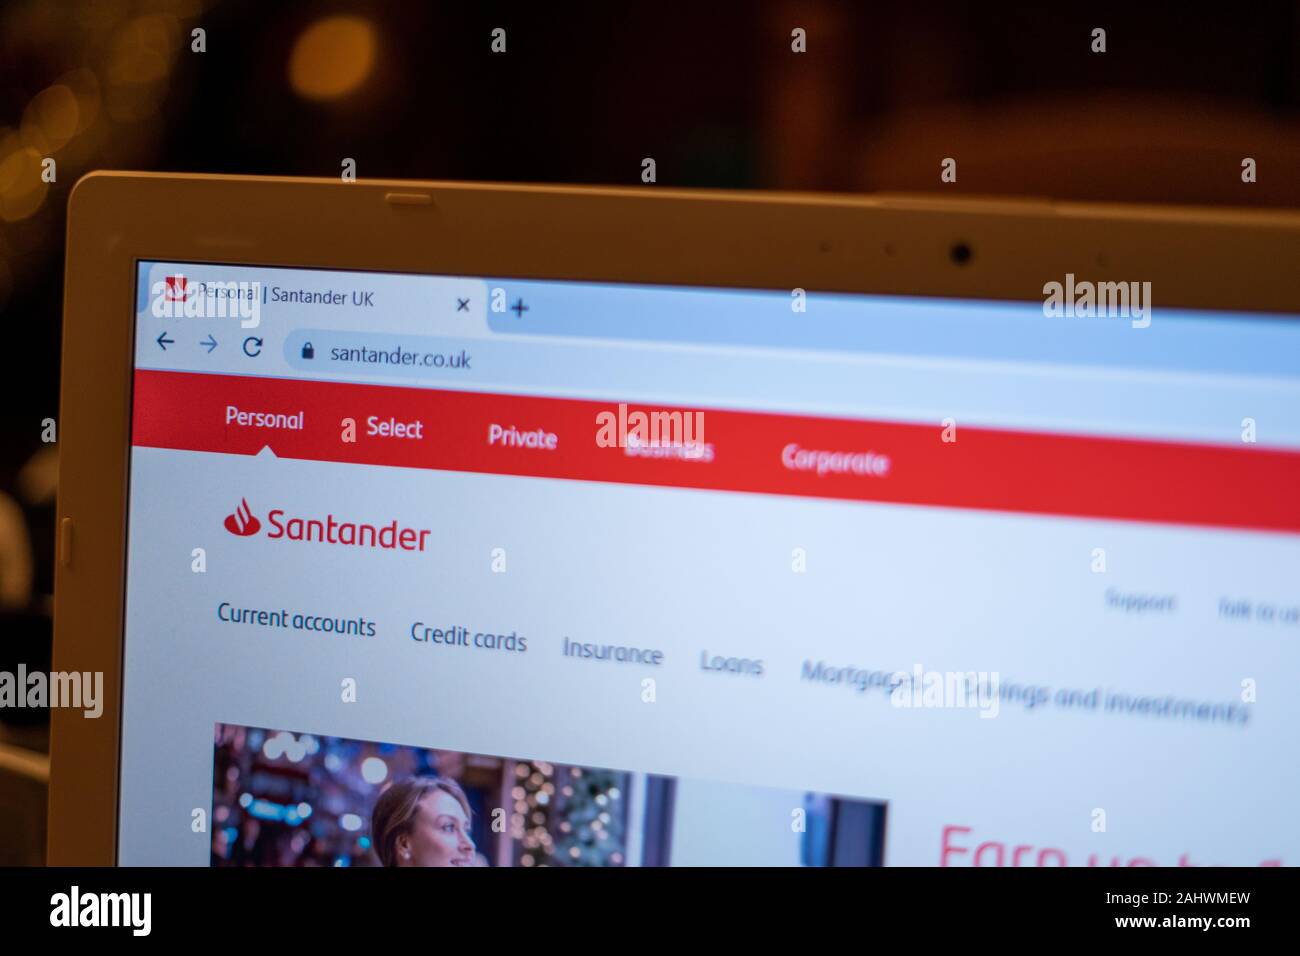 The Santander internet banking homepage on a computer screen Stock Photo